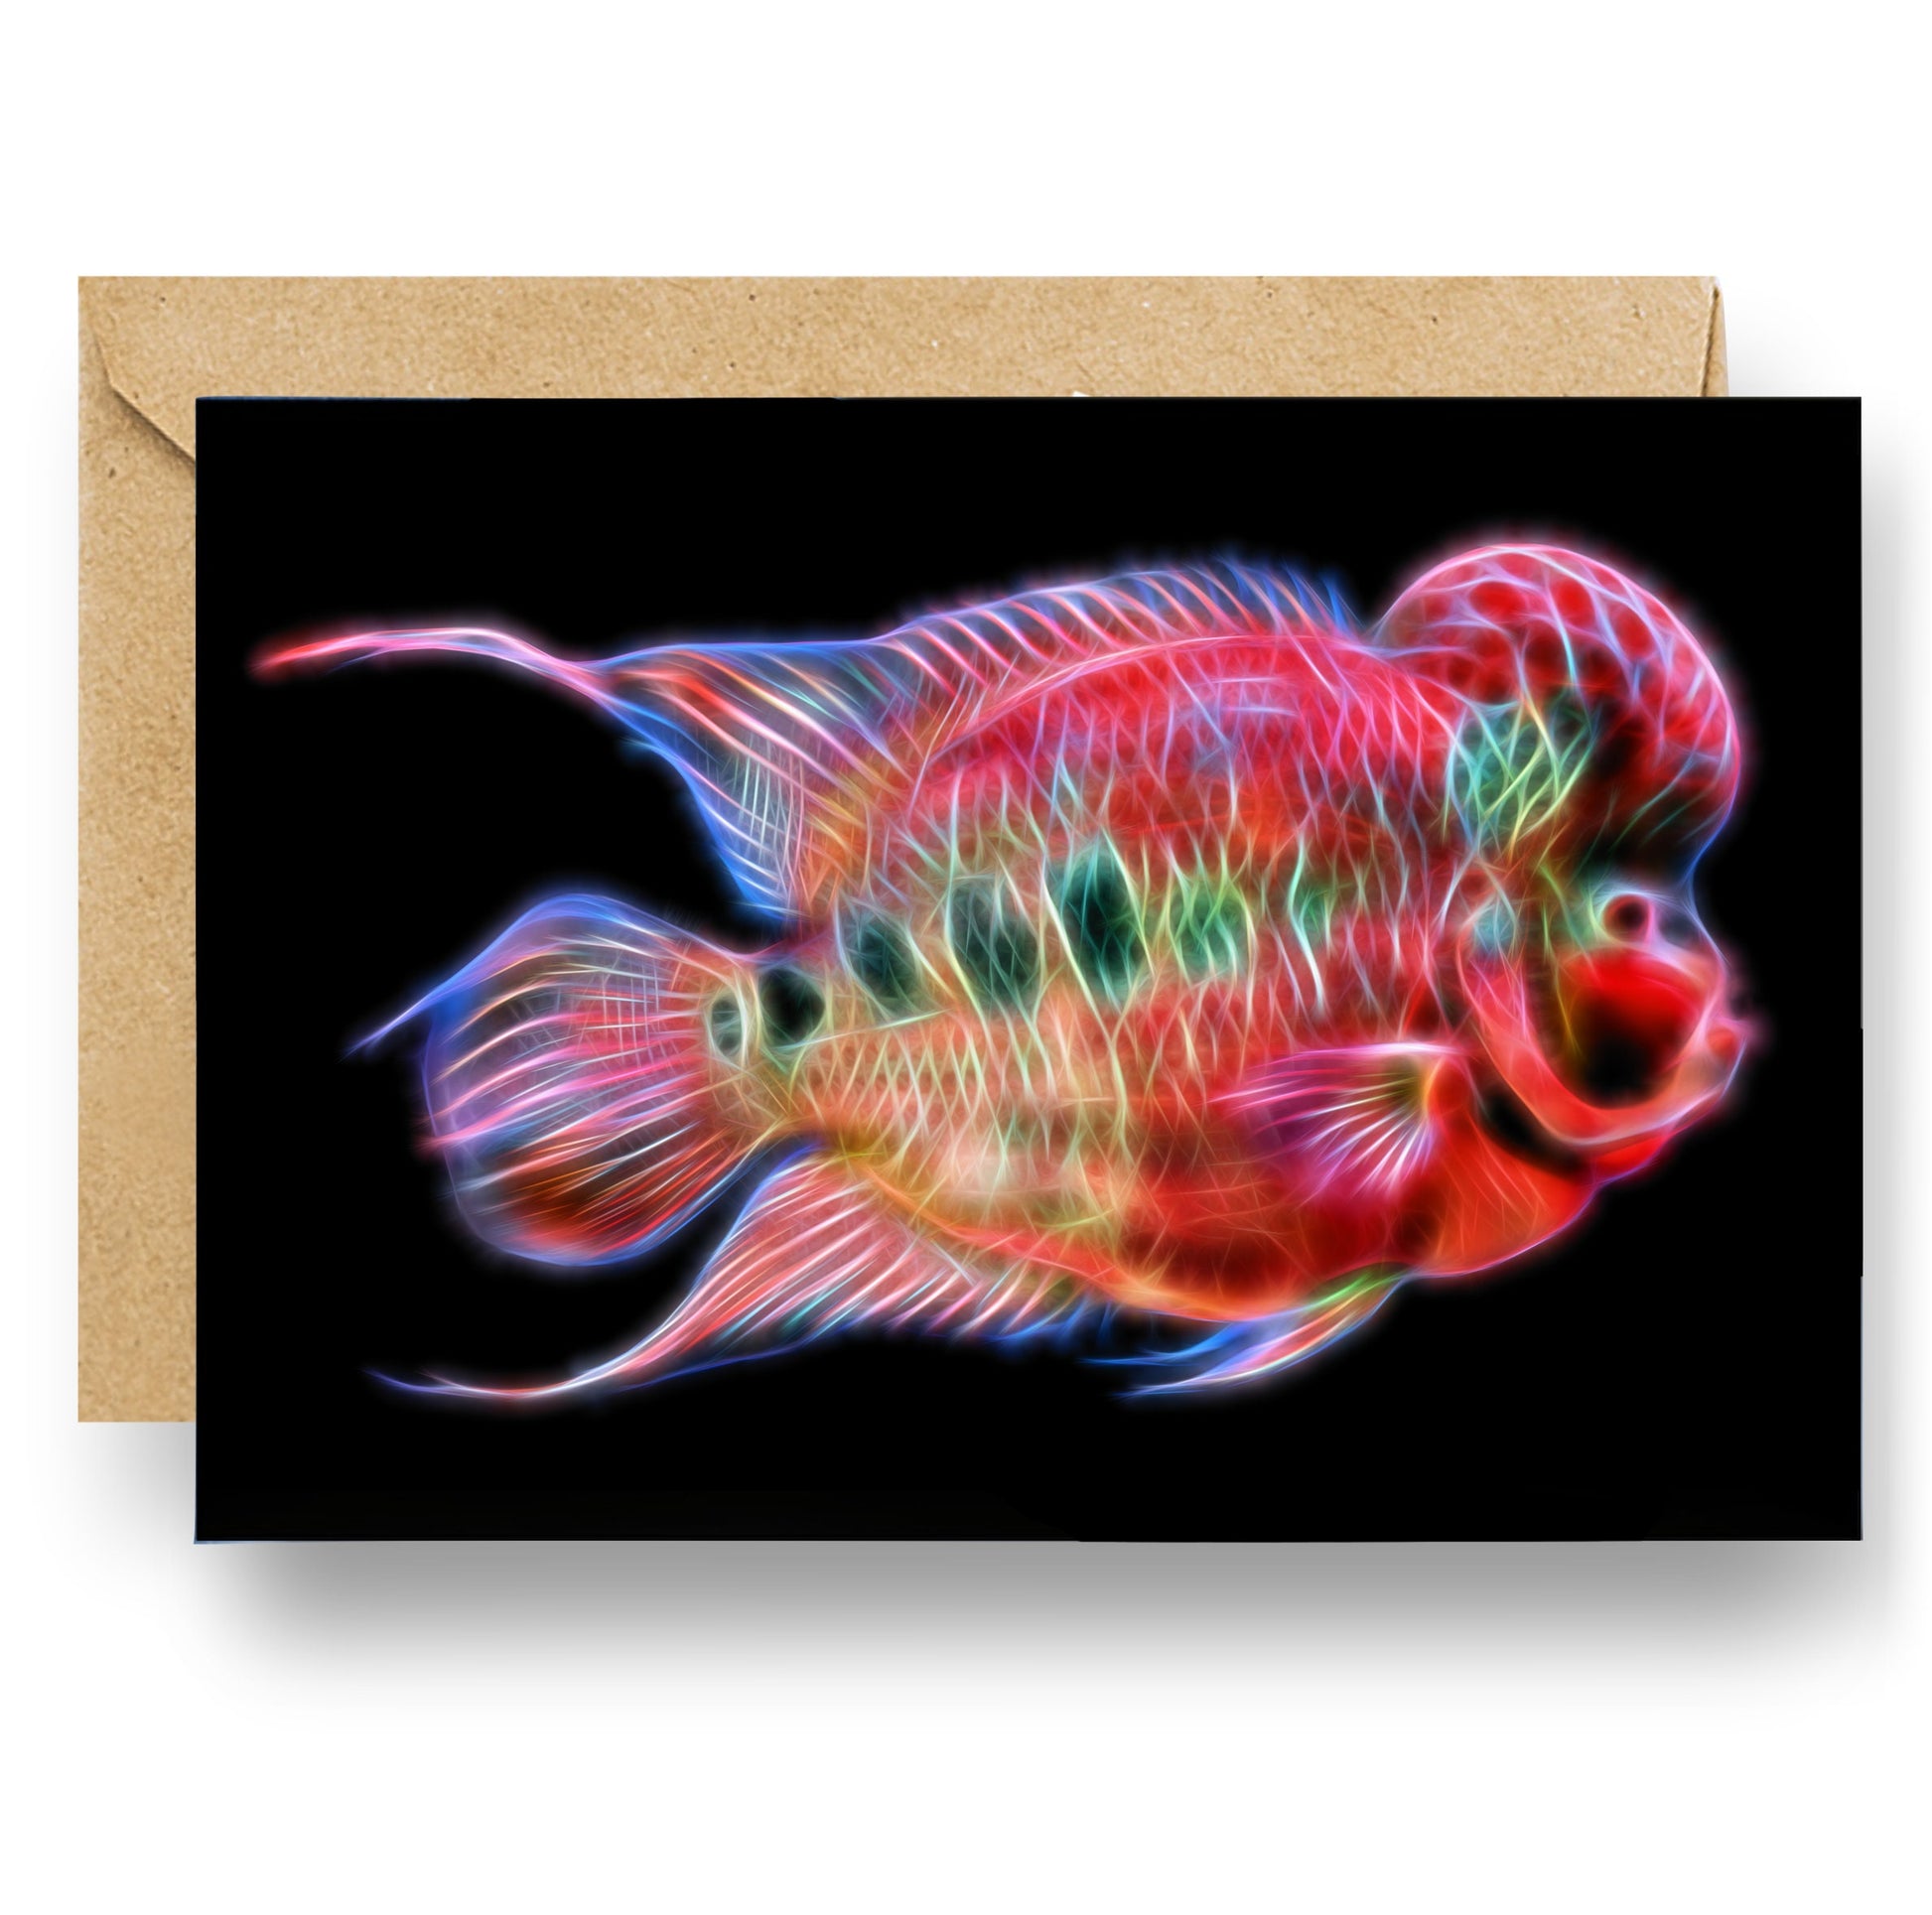 Flowerhorn Greeting Card with Stunning Fractal Art Design. Blank Inside for Birthdays or any other Occasion